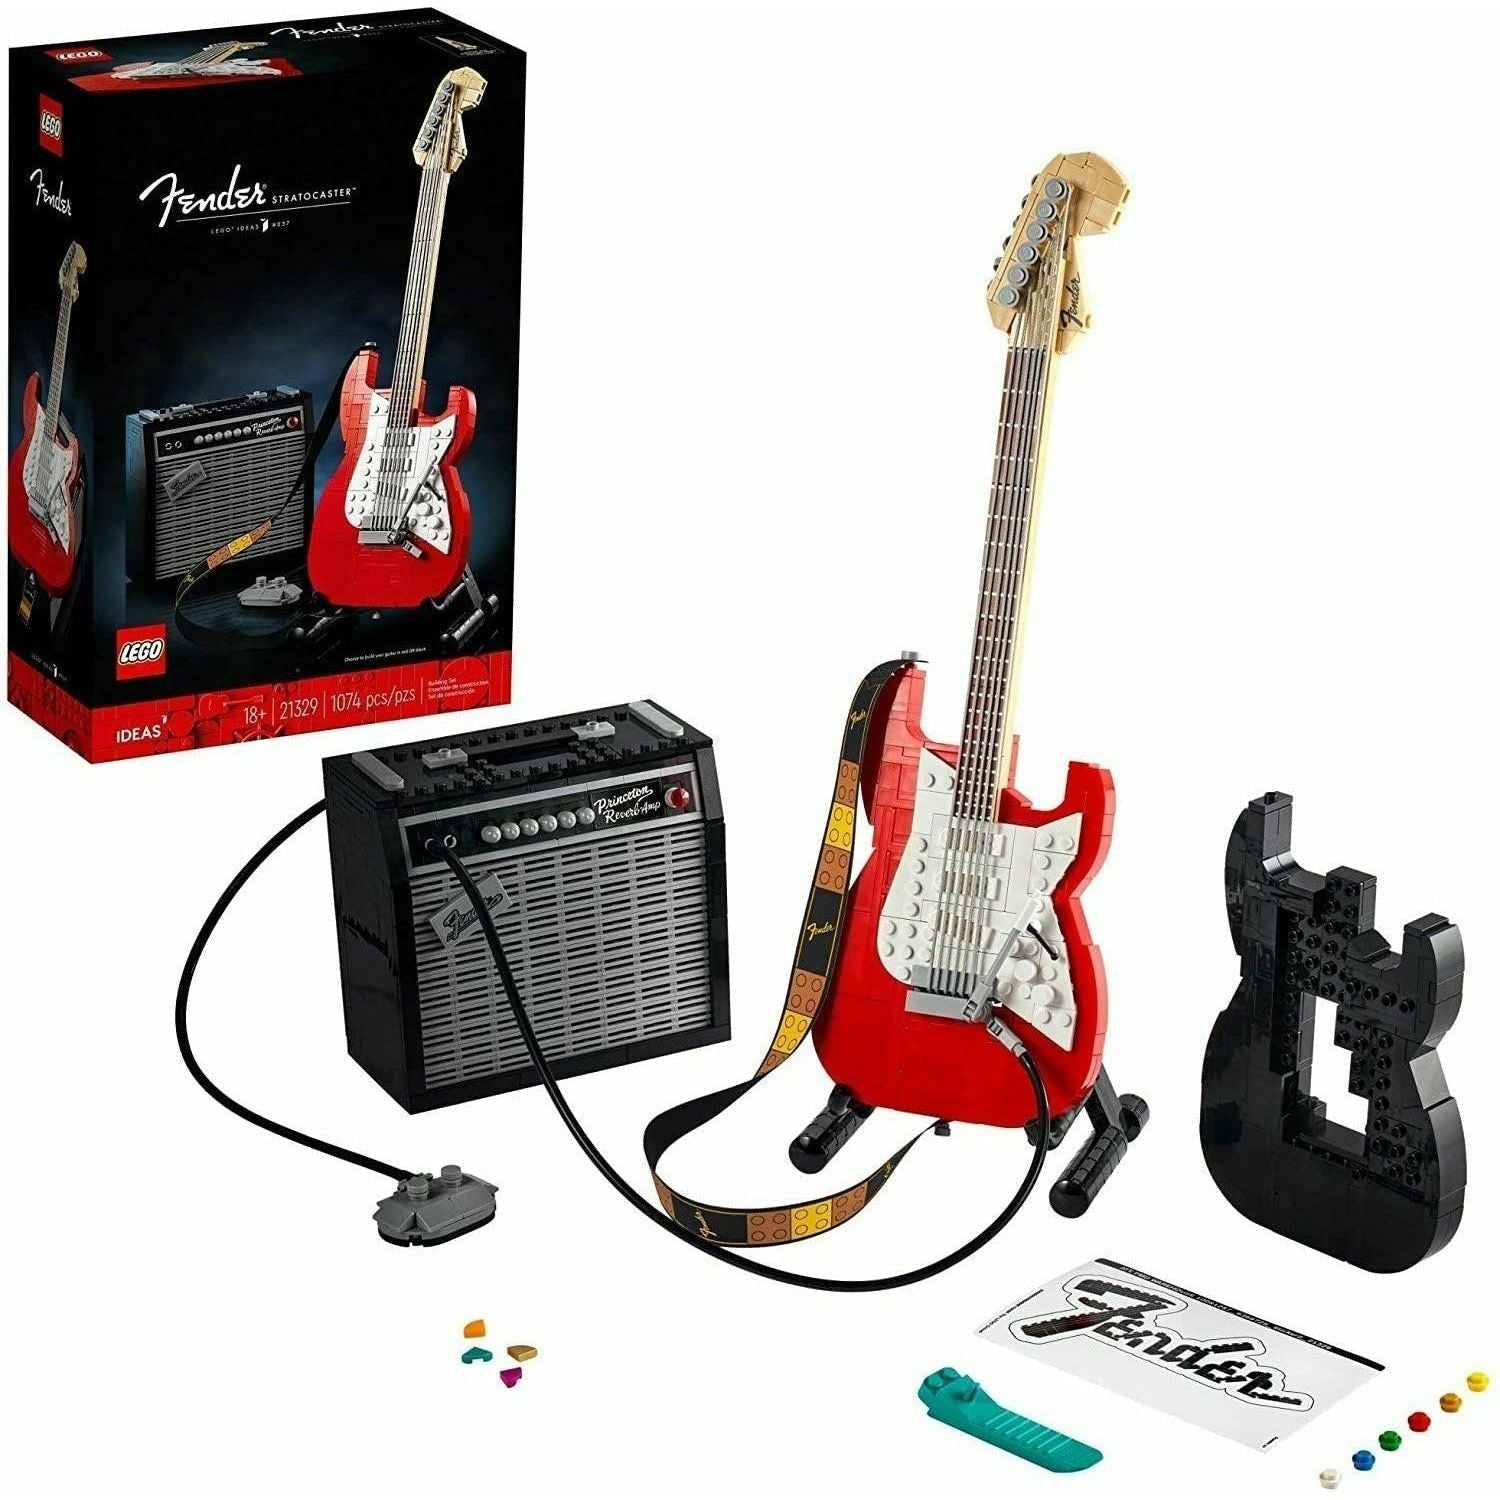 LEGO Ideas Fender Stratocaster 21329 Building Kit Idea for Guitar Players and Music Lovers (1,079 Pieces) - BumbleToys - 18+, Boys, Girls, Ideas, LEGO, Musical Instruments, OXE, Pre-Order